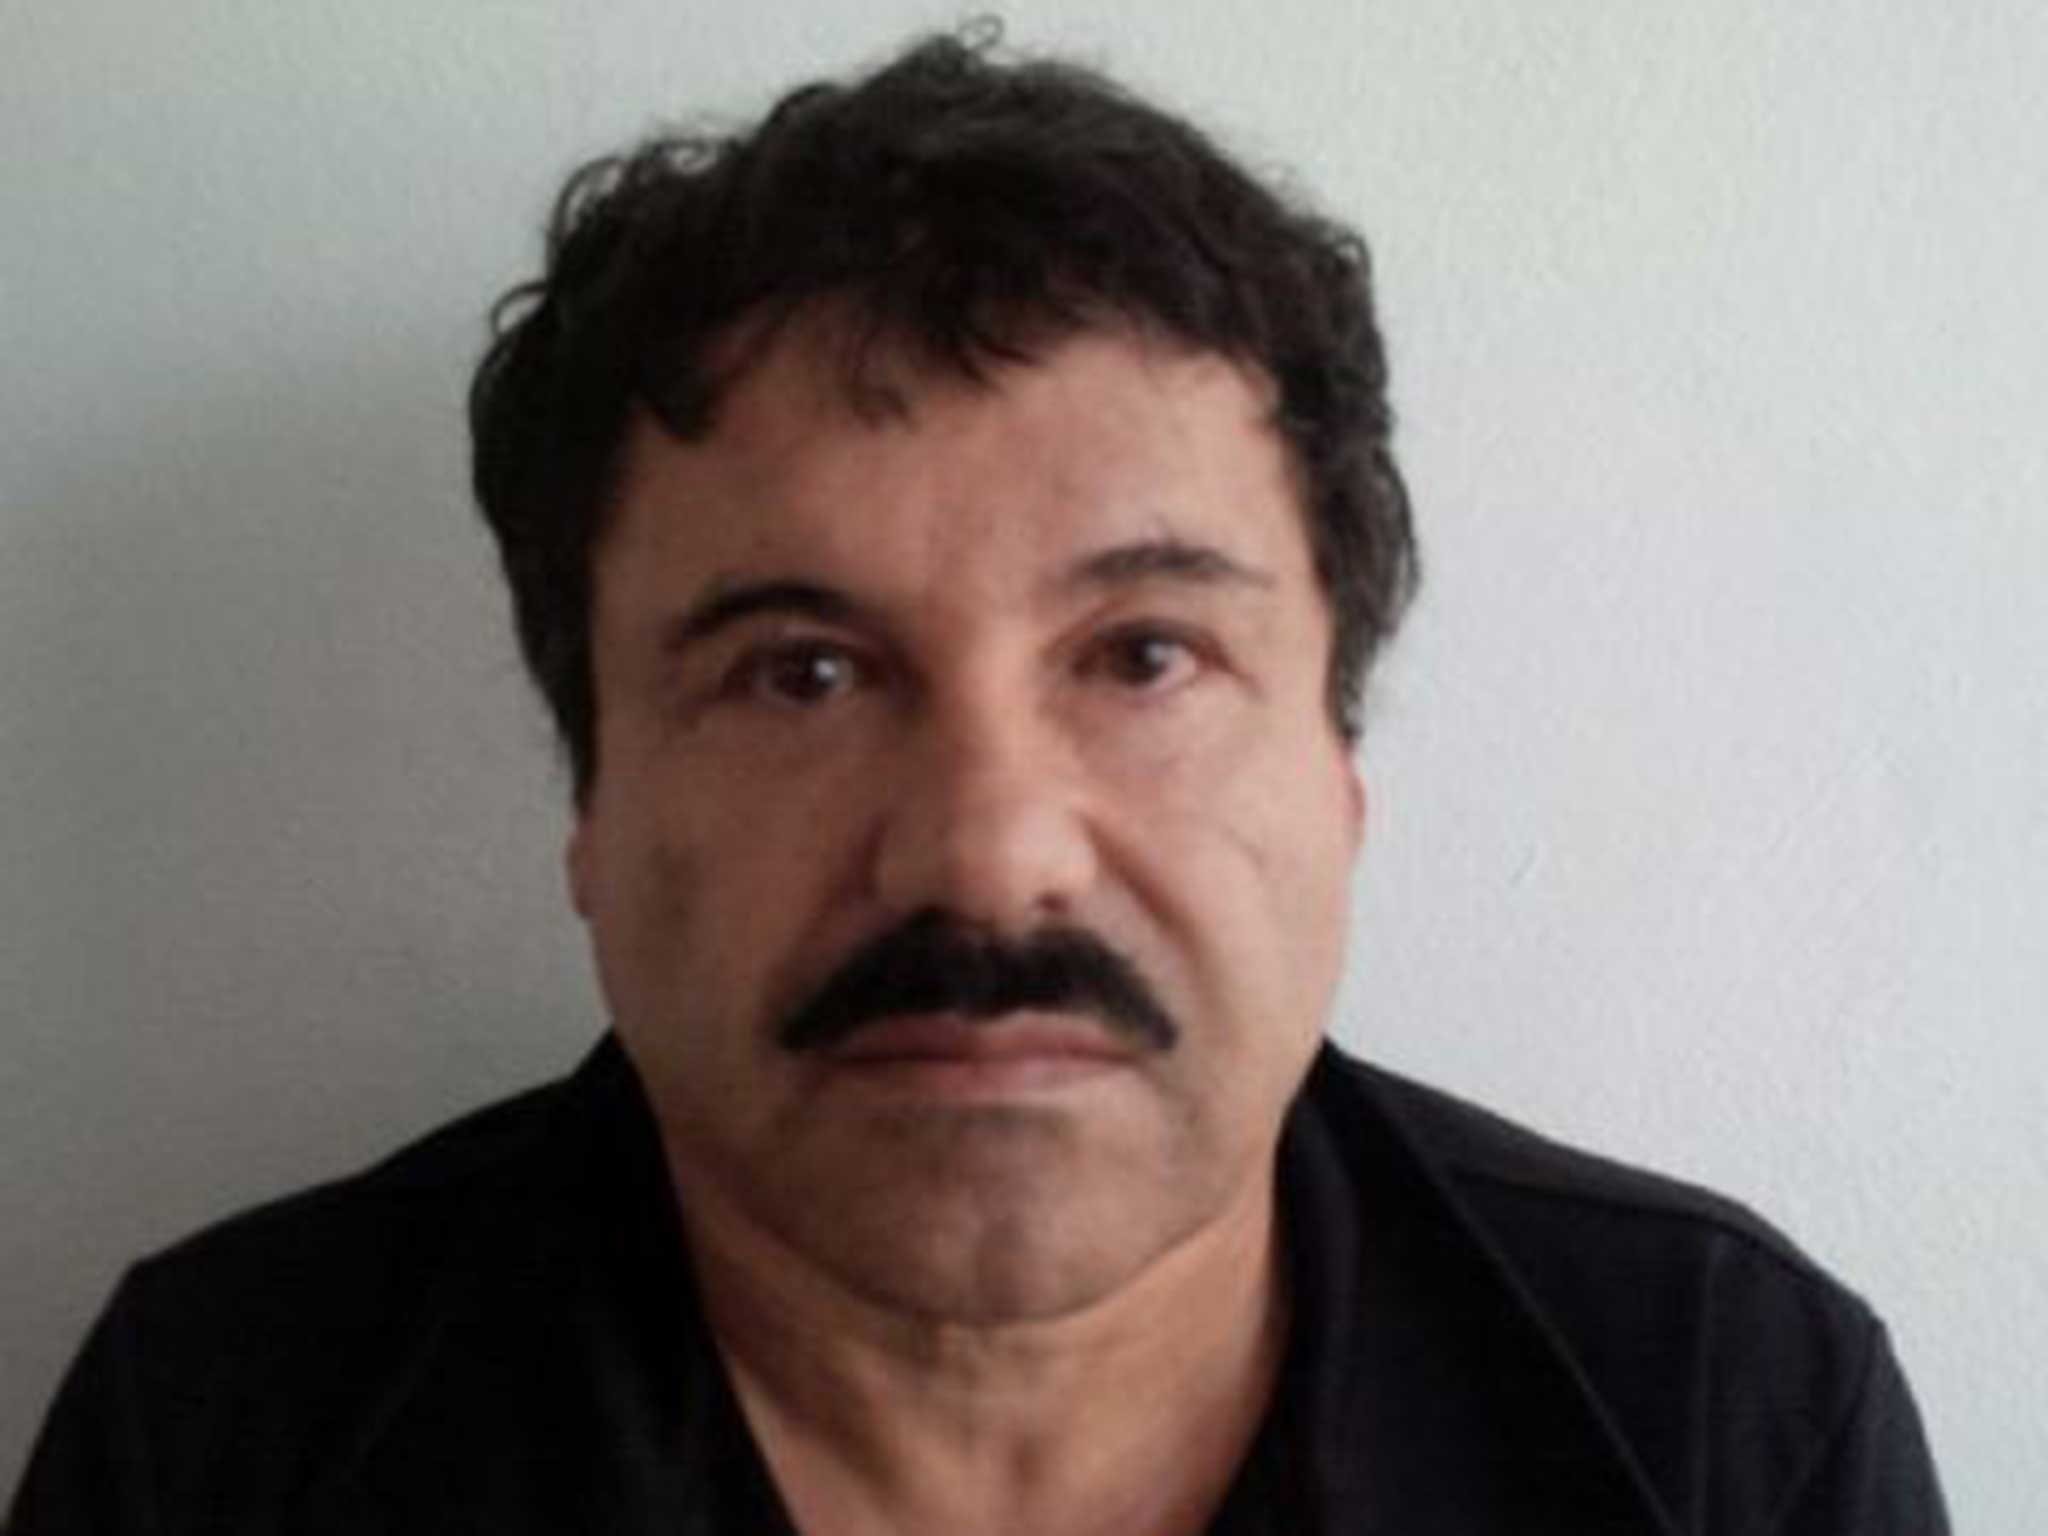 Joaquin ‘El Chapo’ Guzman, 57, after his capture in February this year